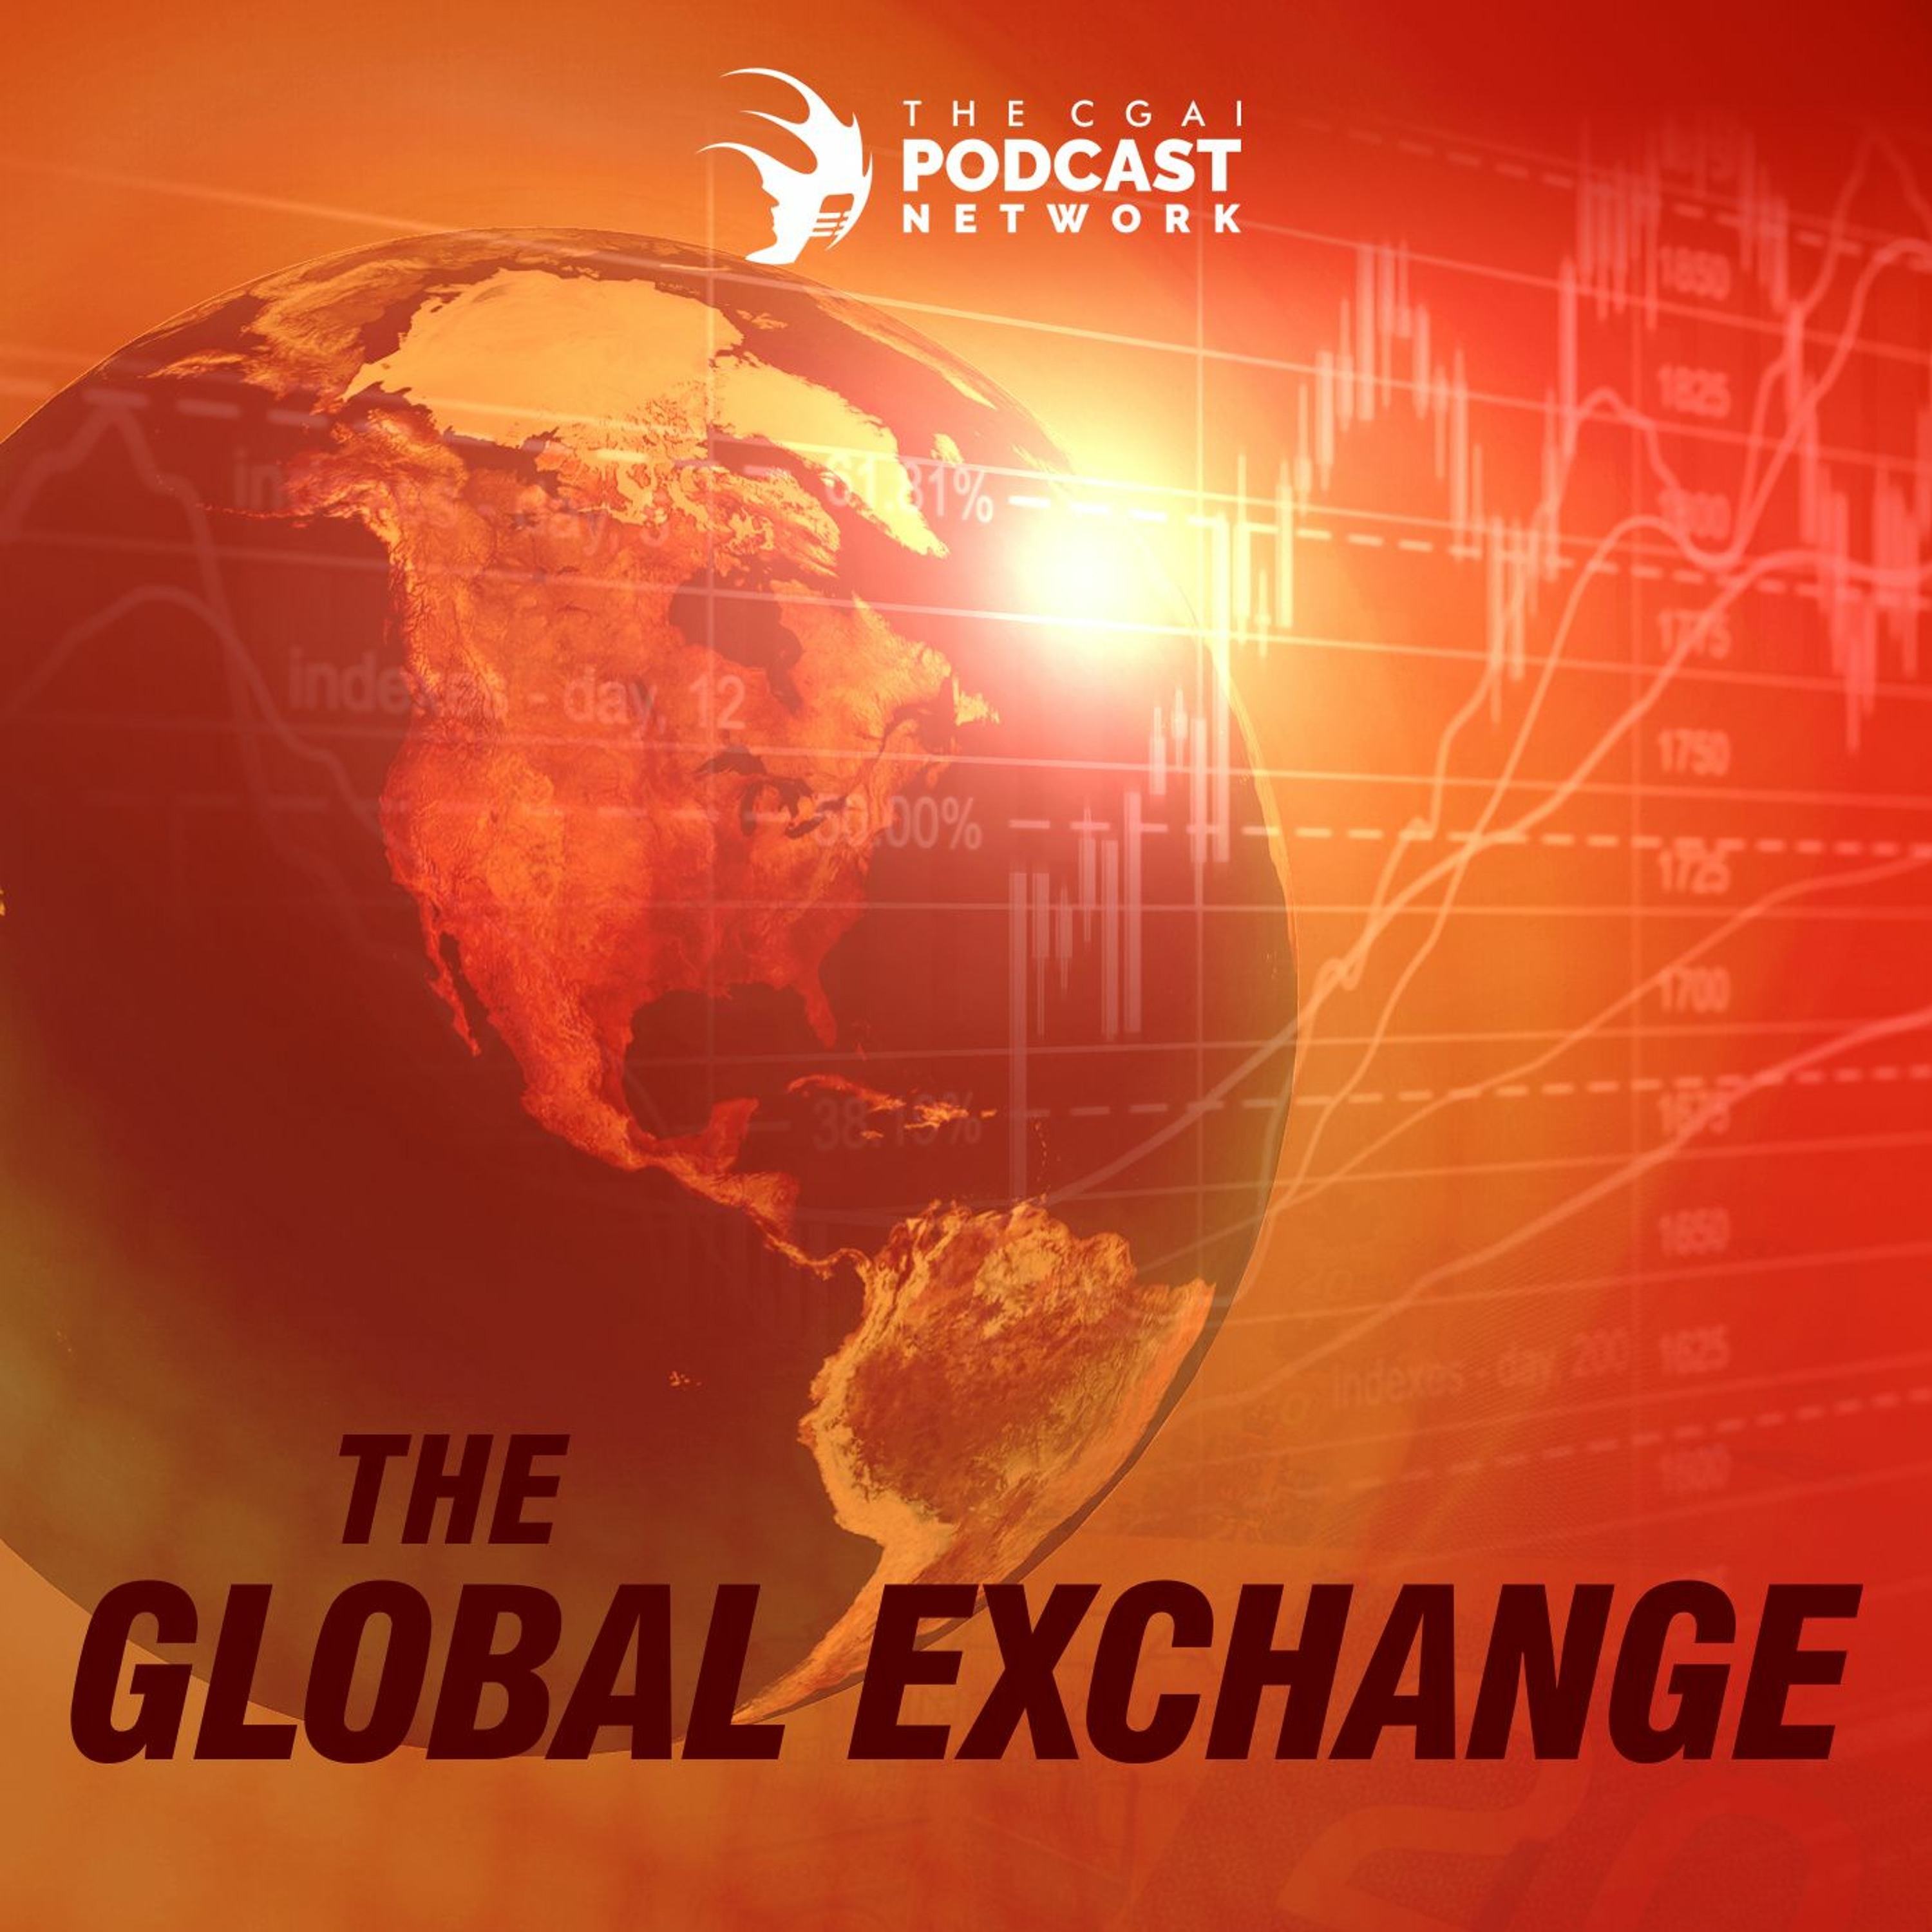 The Global Exchange: Deputy Minister Rob Stewart on Canada’s Position in Global Trade